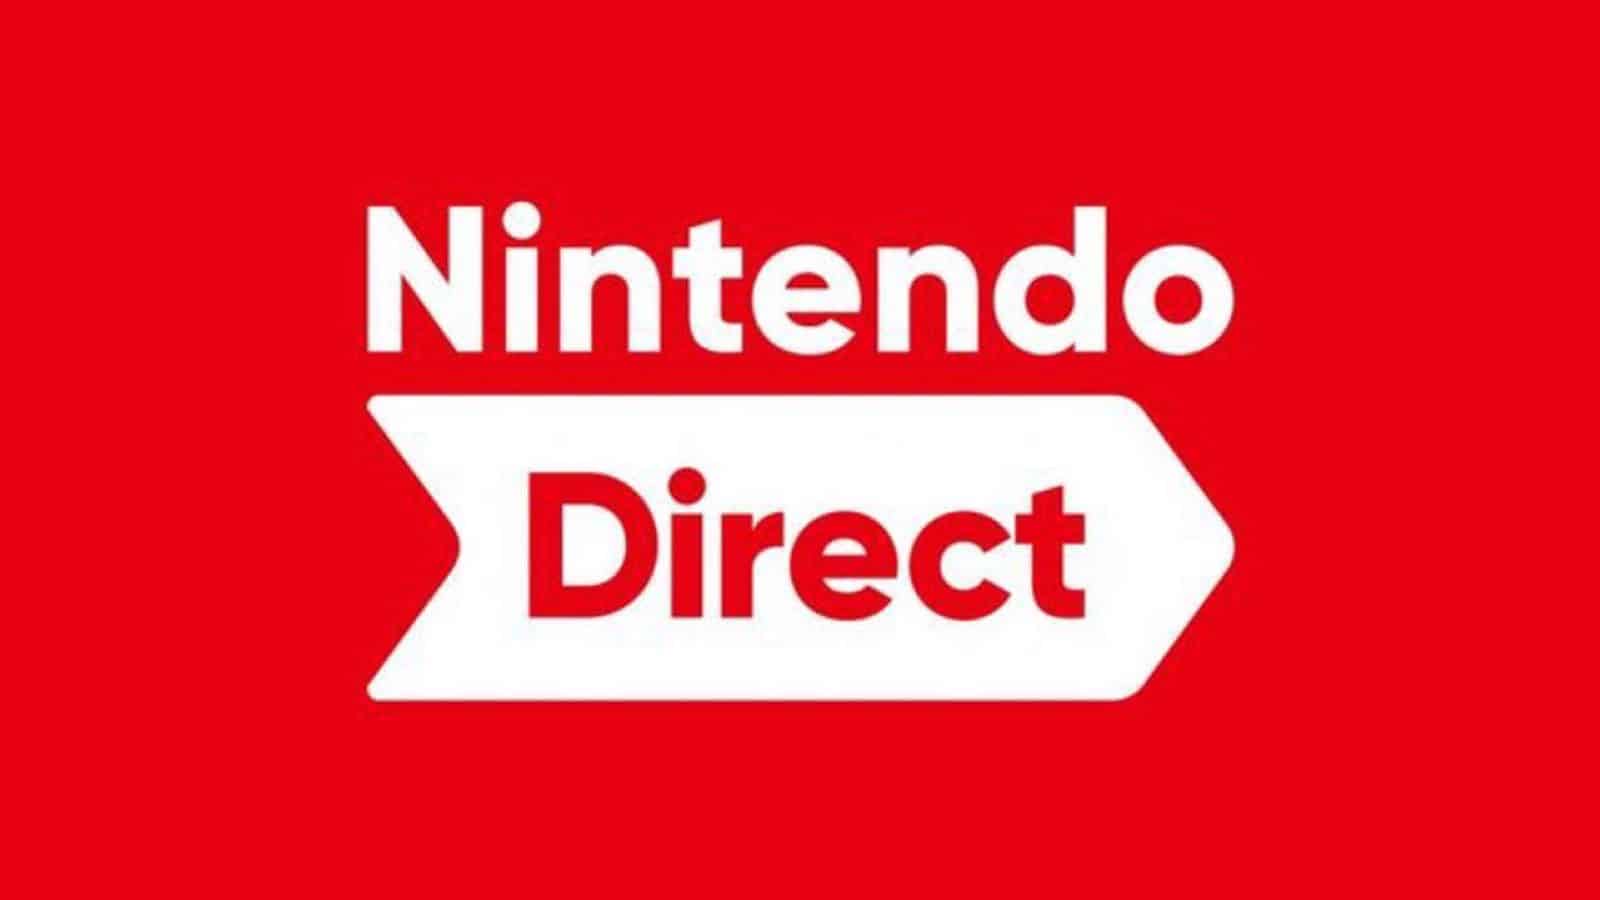 A poster for the next Nintendo Direct